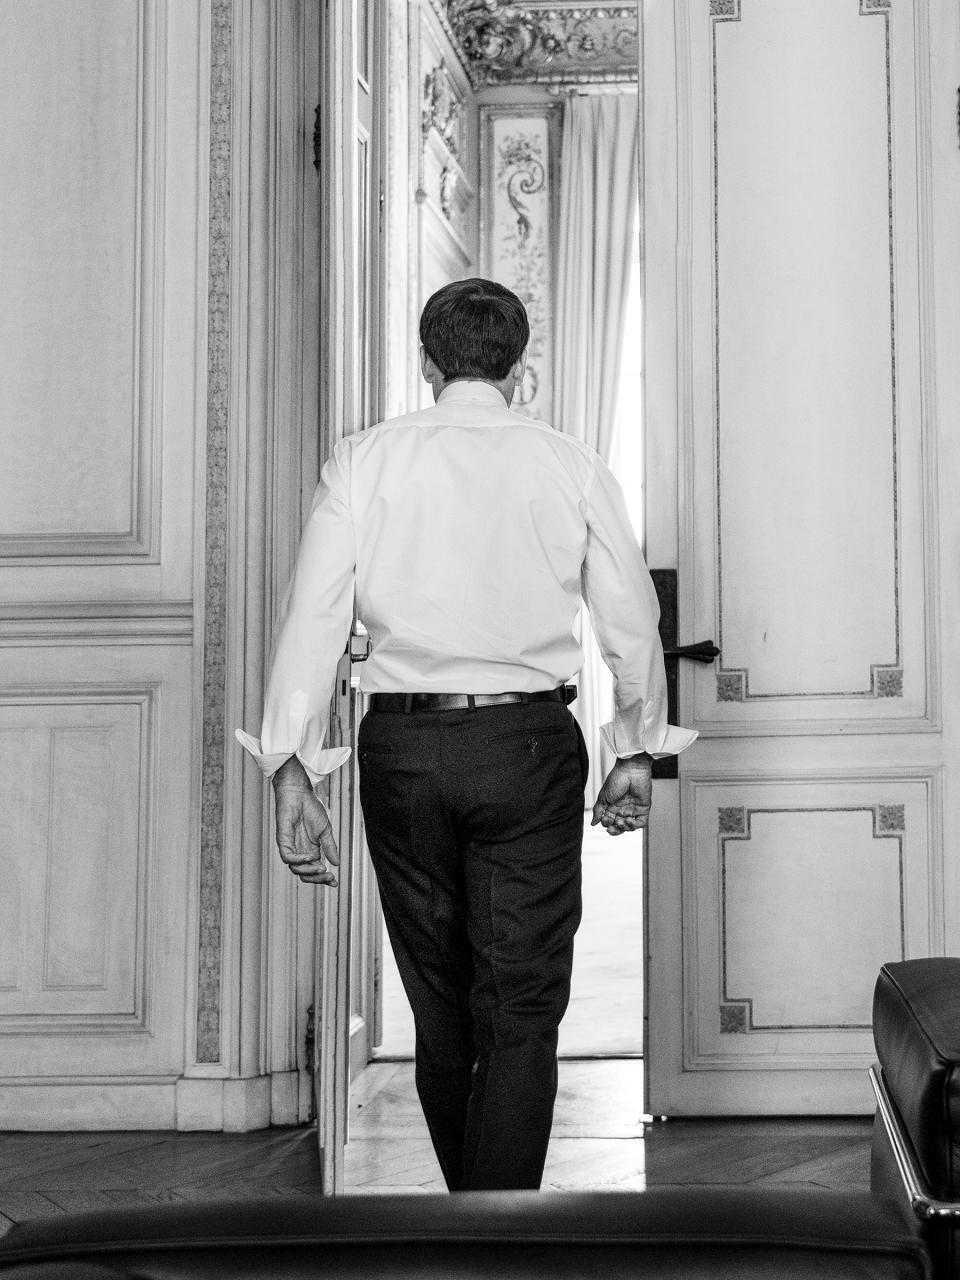 Macron steps out of a high-level meeting in the Élysée Palace in Paris on Sept. 9 | Christopher Anderson—Magnum Photos for TIME